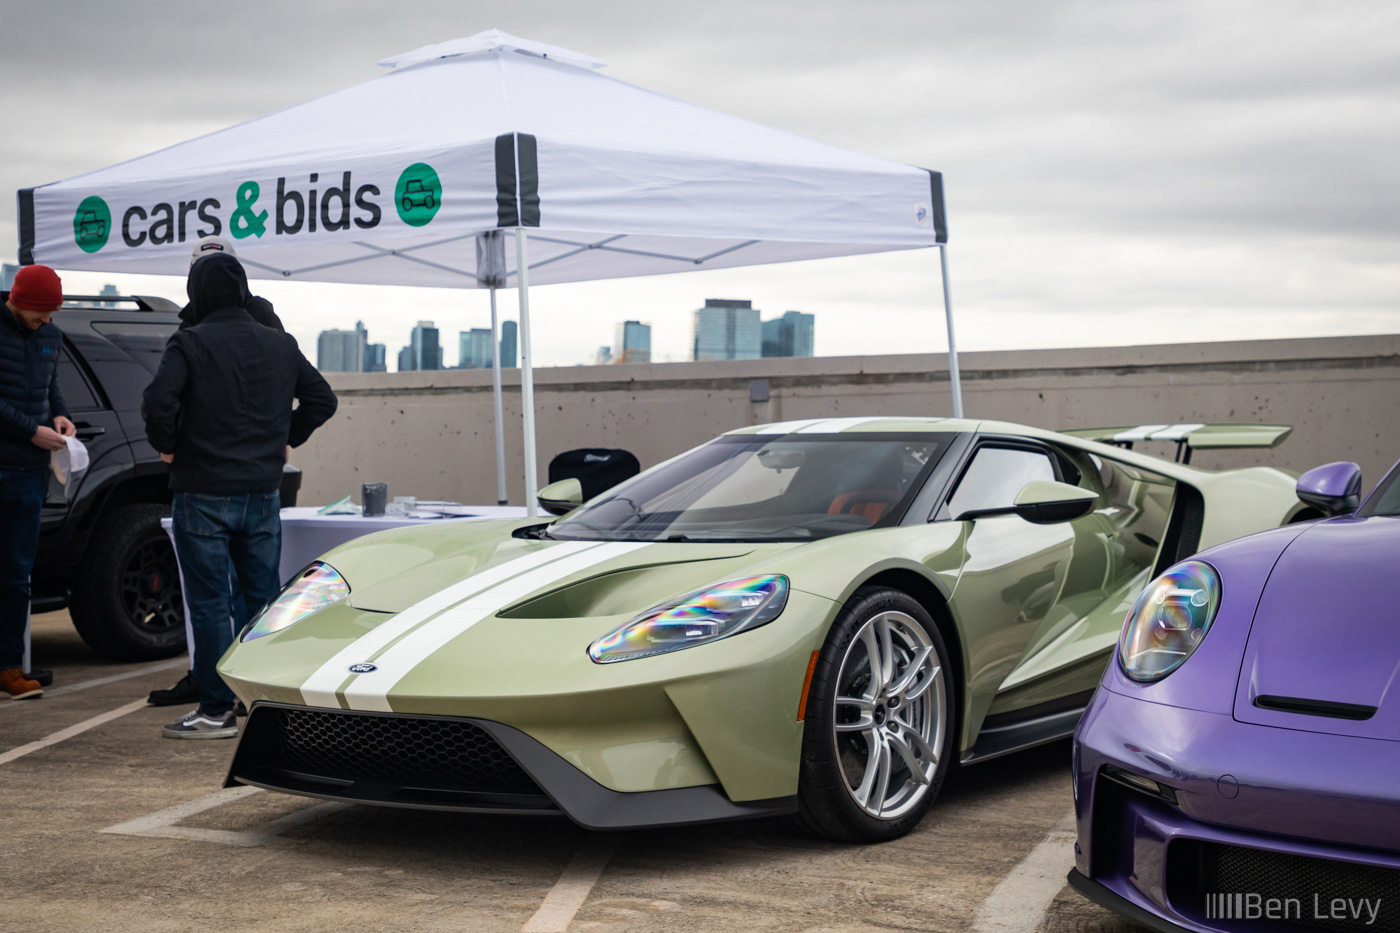 Green Ford GT at the Cars & Bids Booth